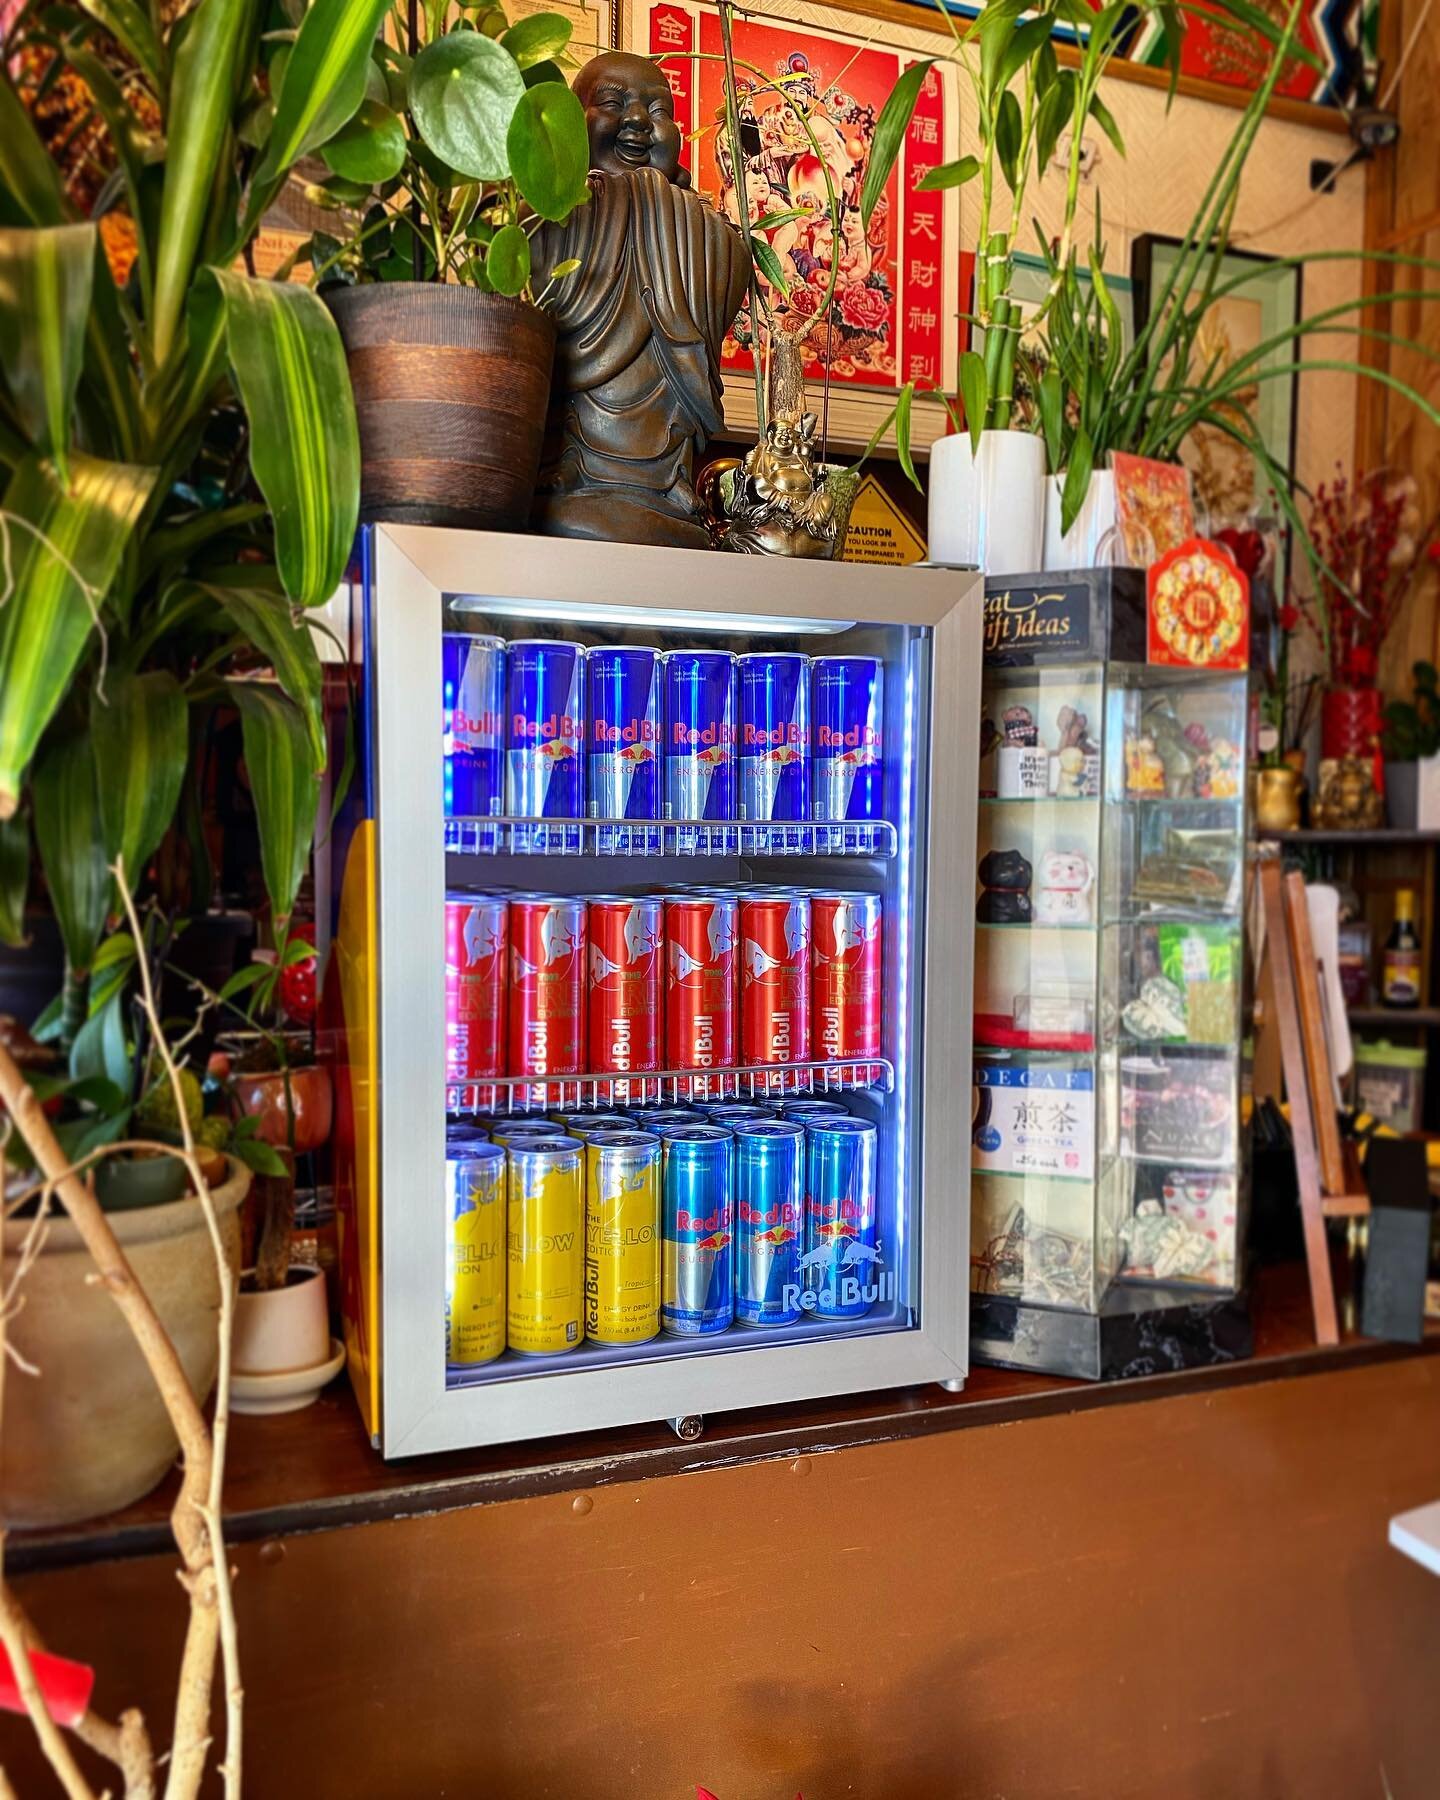 We&rsquo;re now offering @redbull for those that need a quick pick up before going back to work, running errands or just in general!! 
&bull;
&bull;
#familybusiness #familyrestaurant #localfamilybusiness #localfamilyrestaurant #familyownedbusiness #f